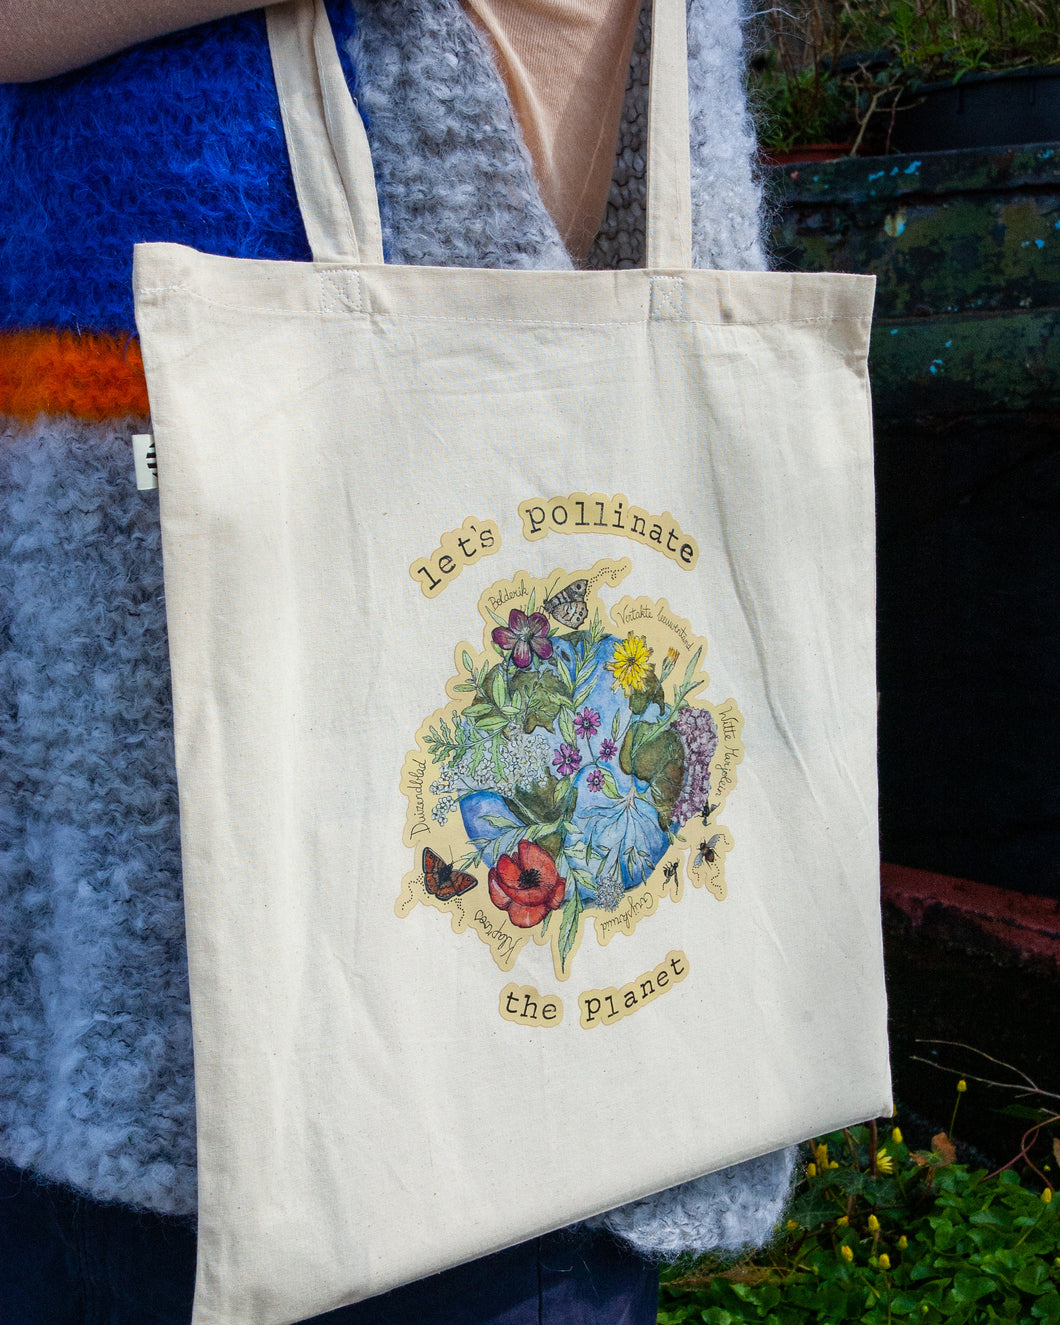 Let's Pollinate the Planet Tas